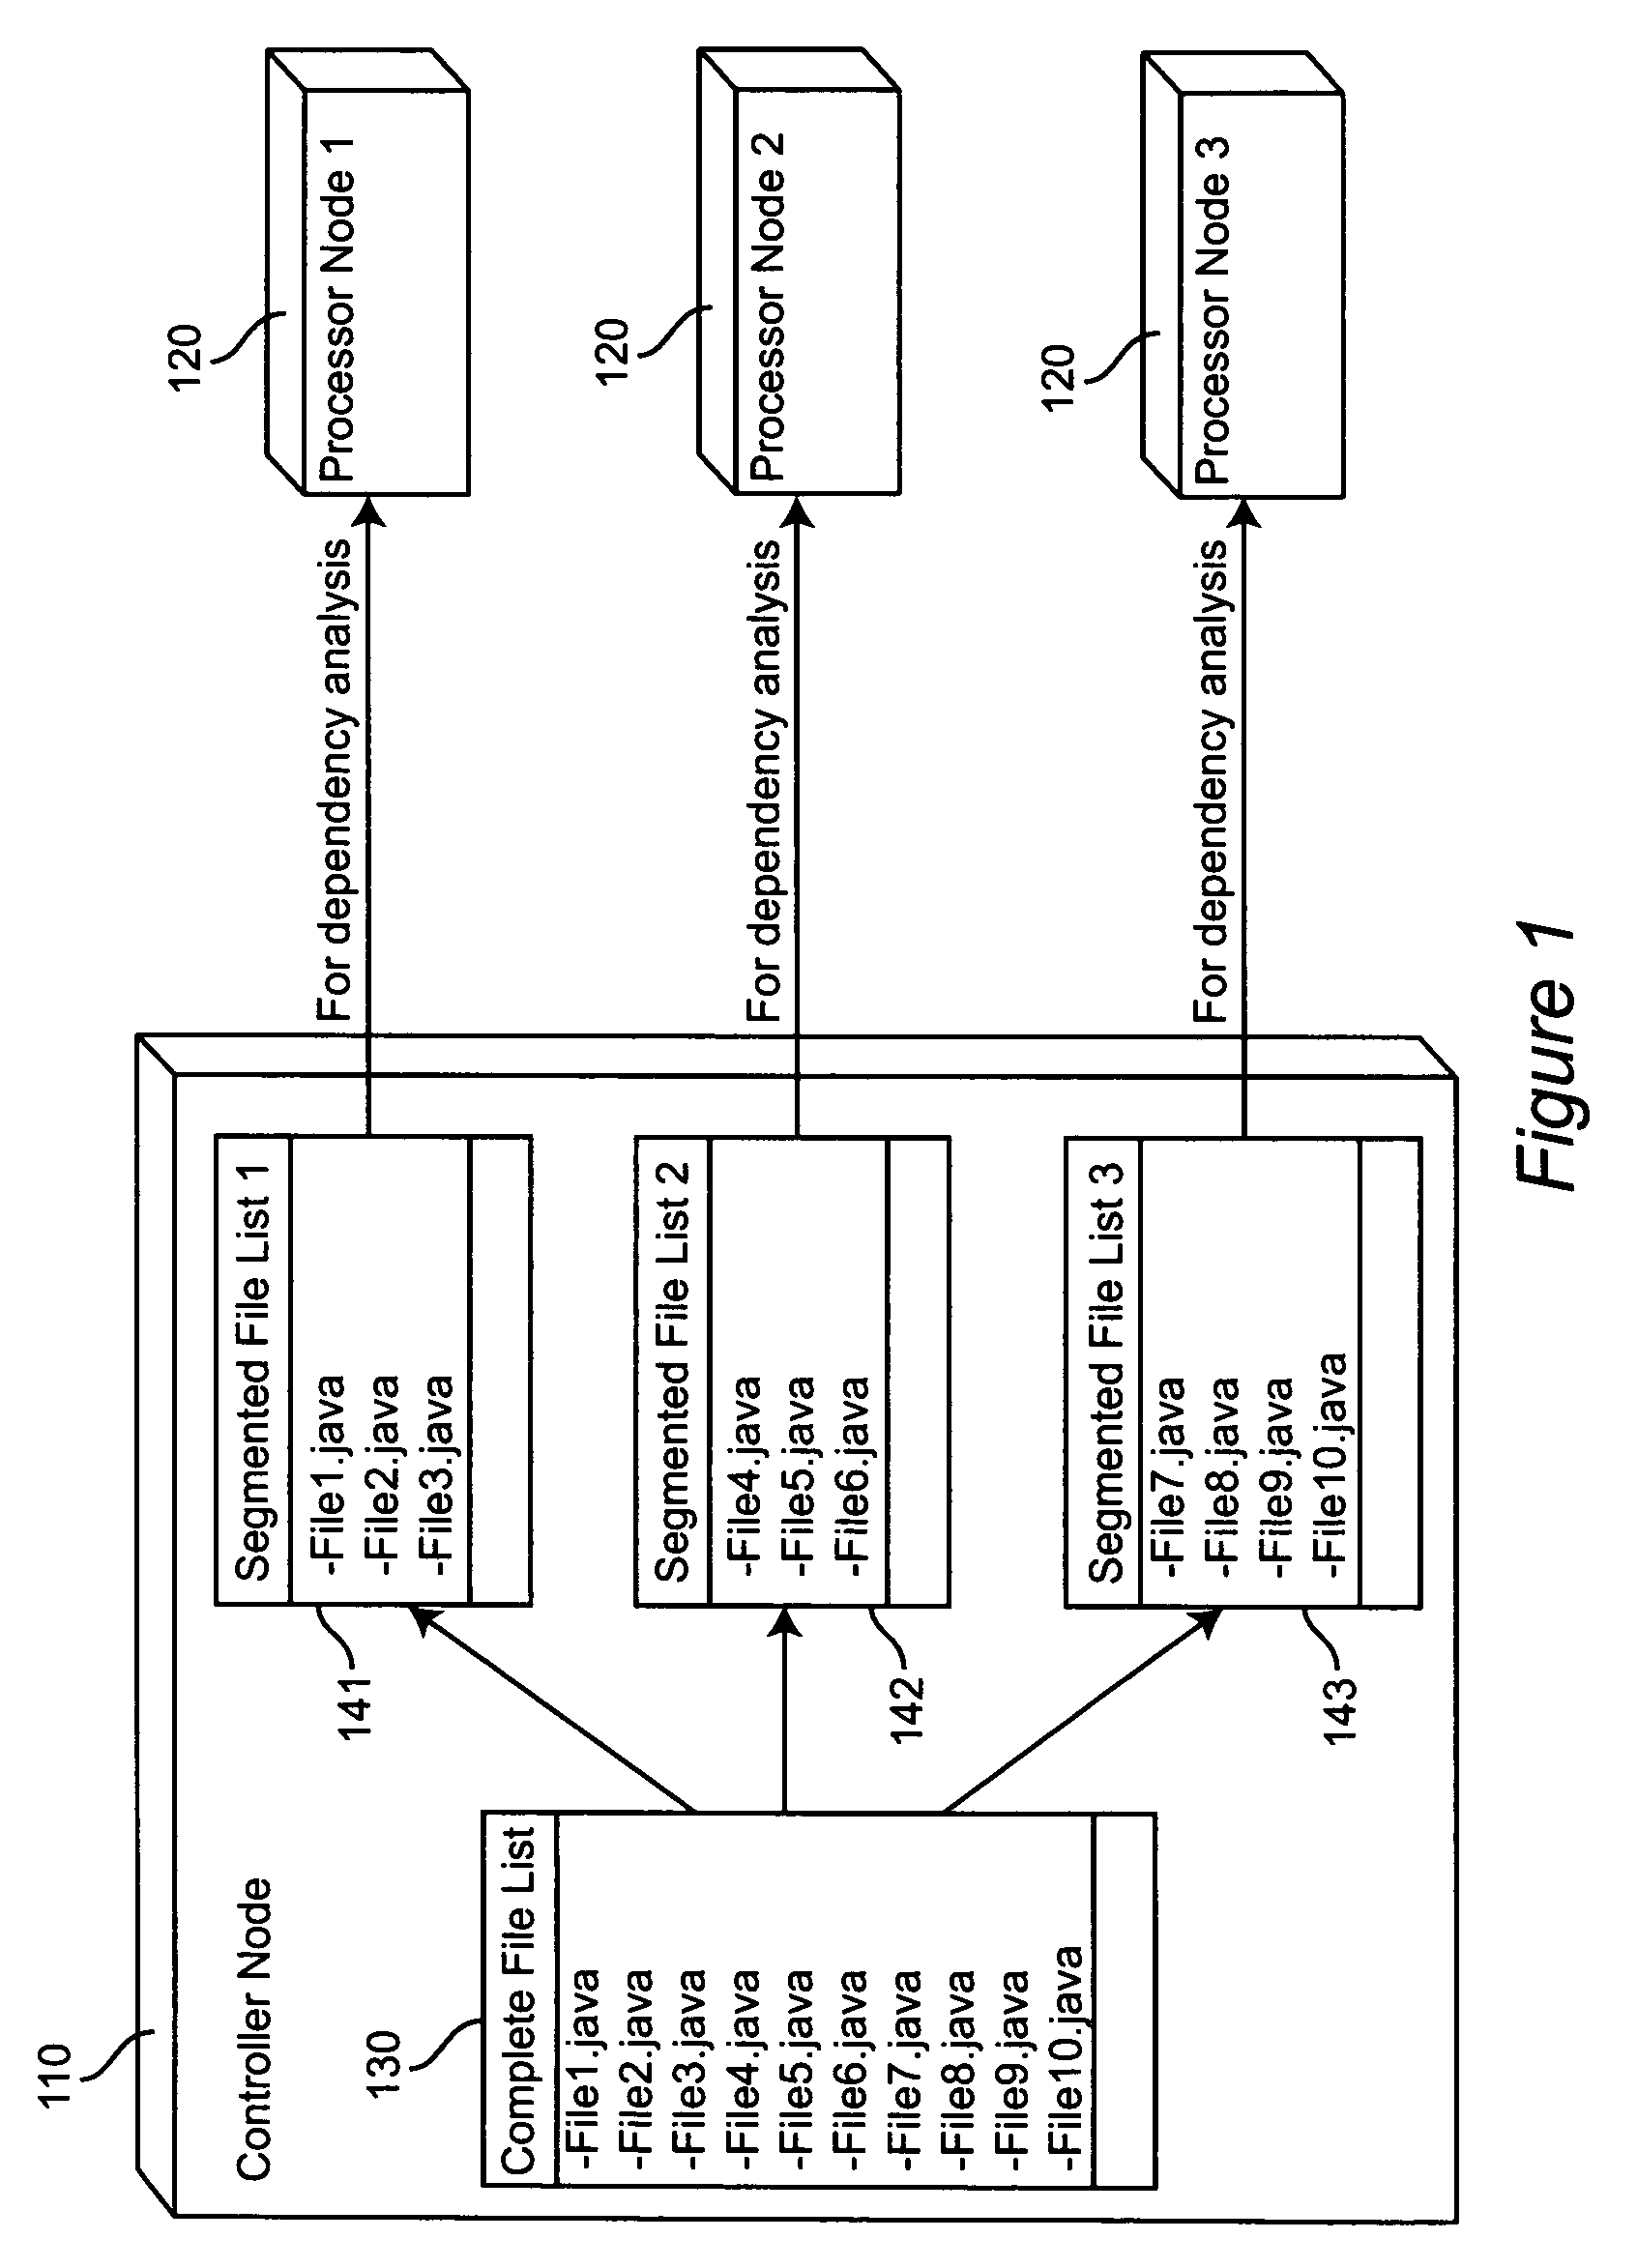 System and method for grid-based distribution of Java project compilation